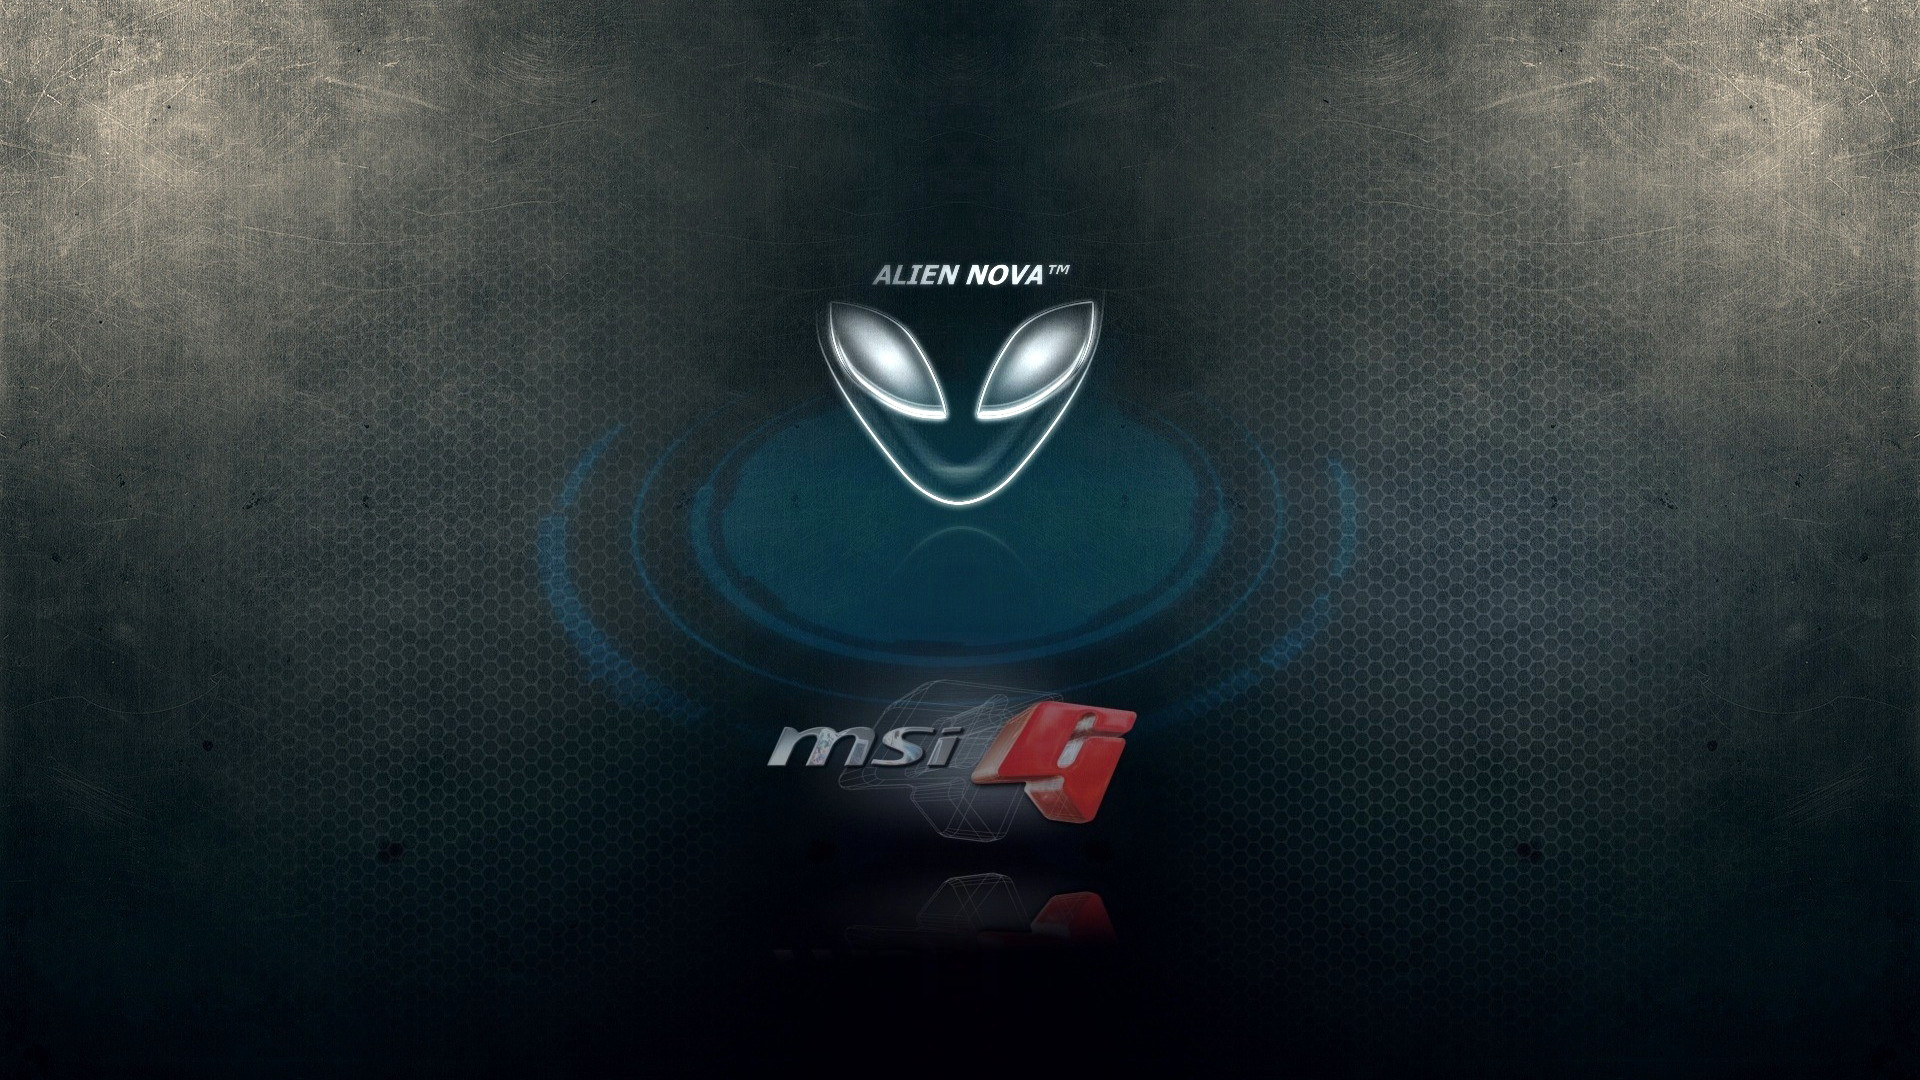 1920x1080 alienware and MSi g logo hd  1080p wallpaper compatible for  